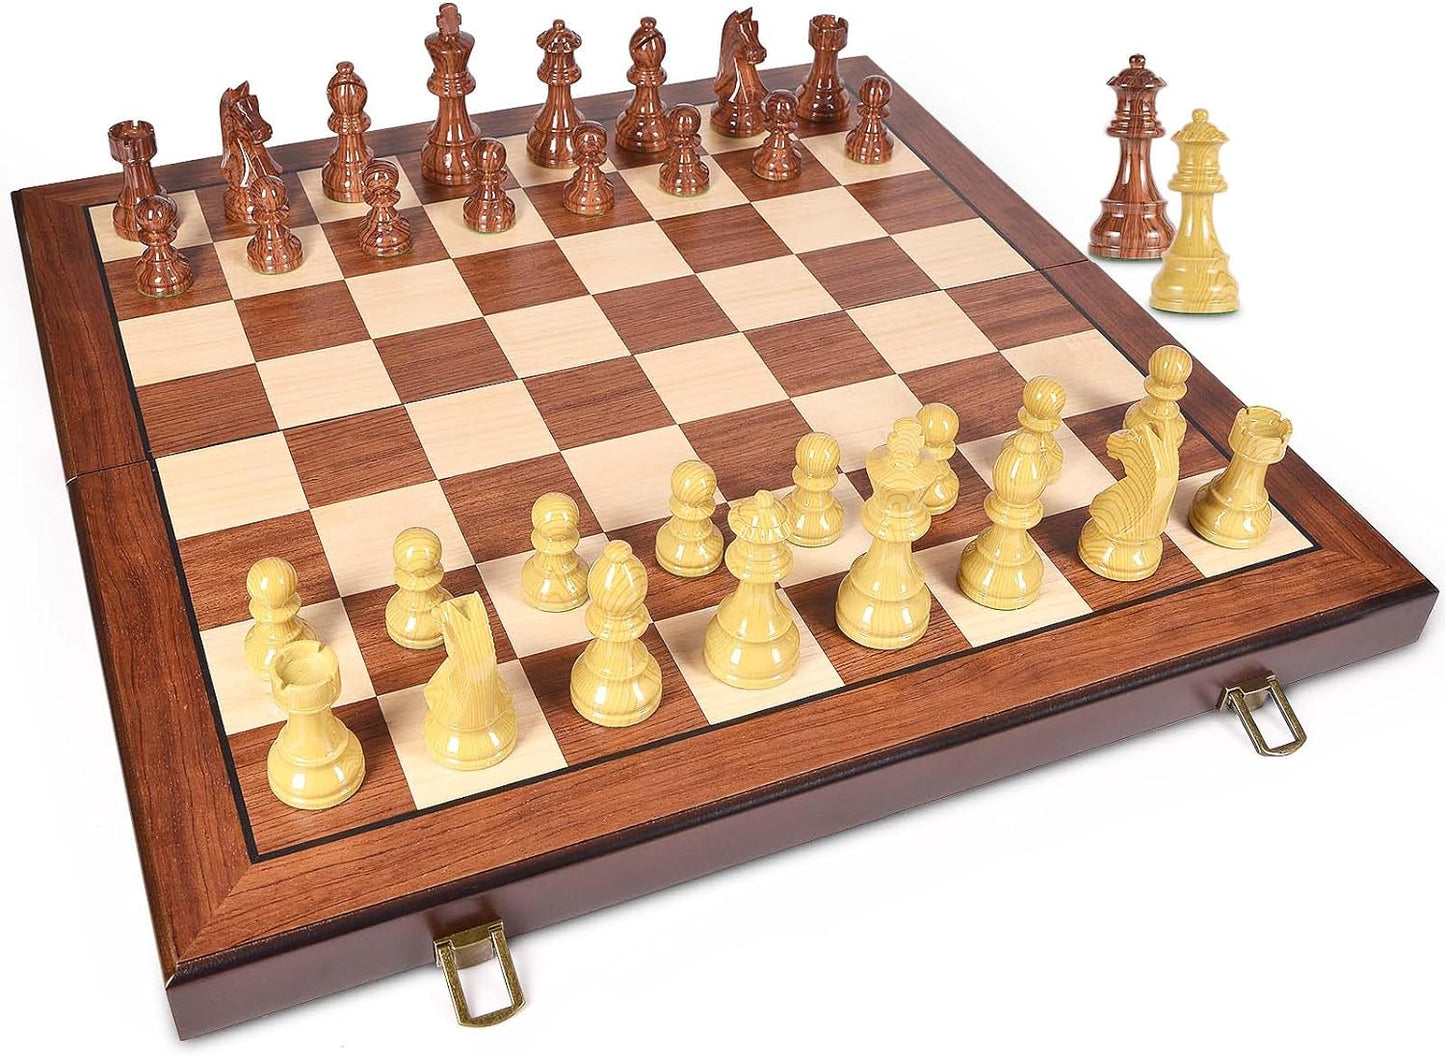 AMEROUR 20'' x 20'' Wooden Chess Set with High Polymer Weighted Chess Pieces / 3.75'' King / 2 Extra Queens/Larger Size Folding Board, Chess Board Game for Adults